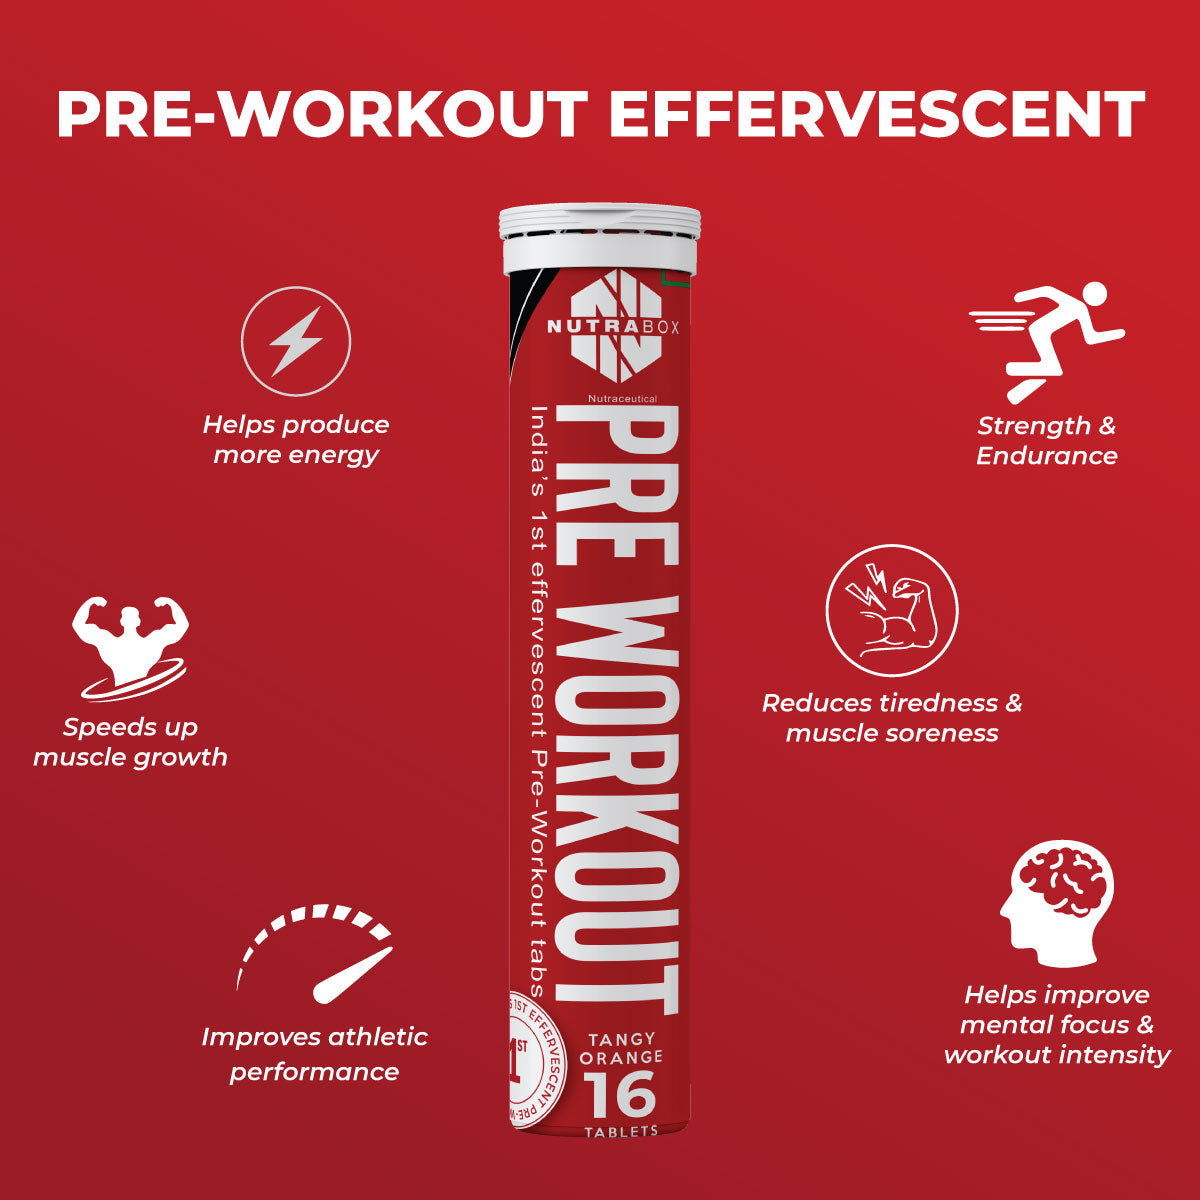 Pre-Workout Effervescent Tabs - Nutrabox India